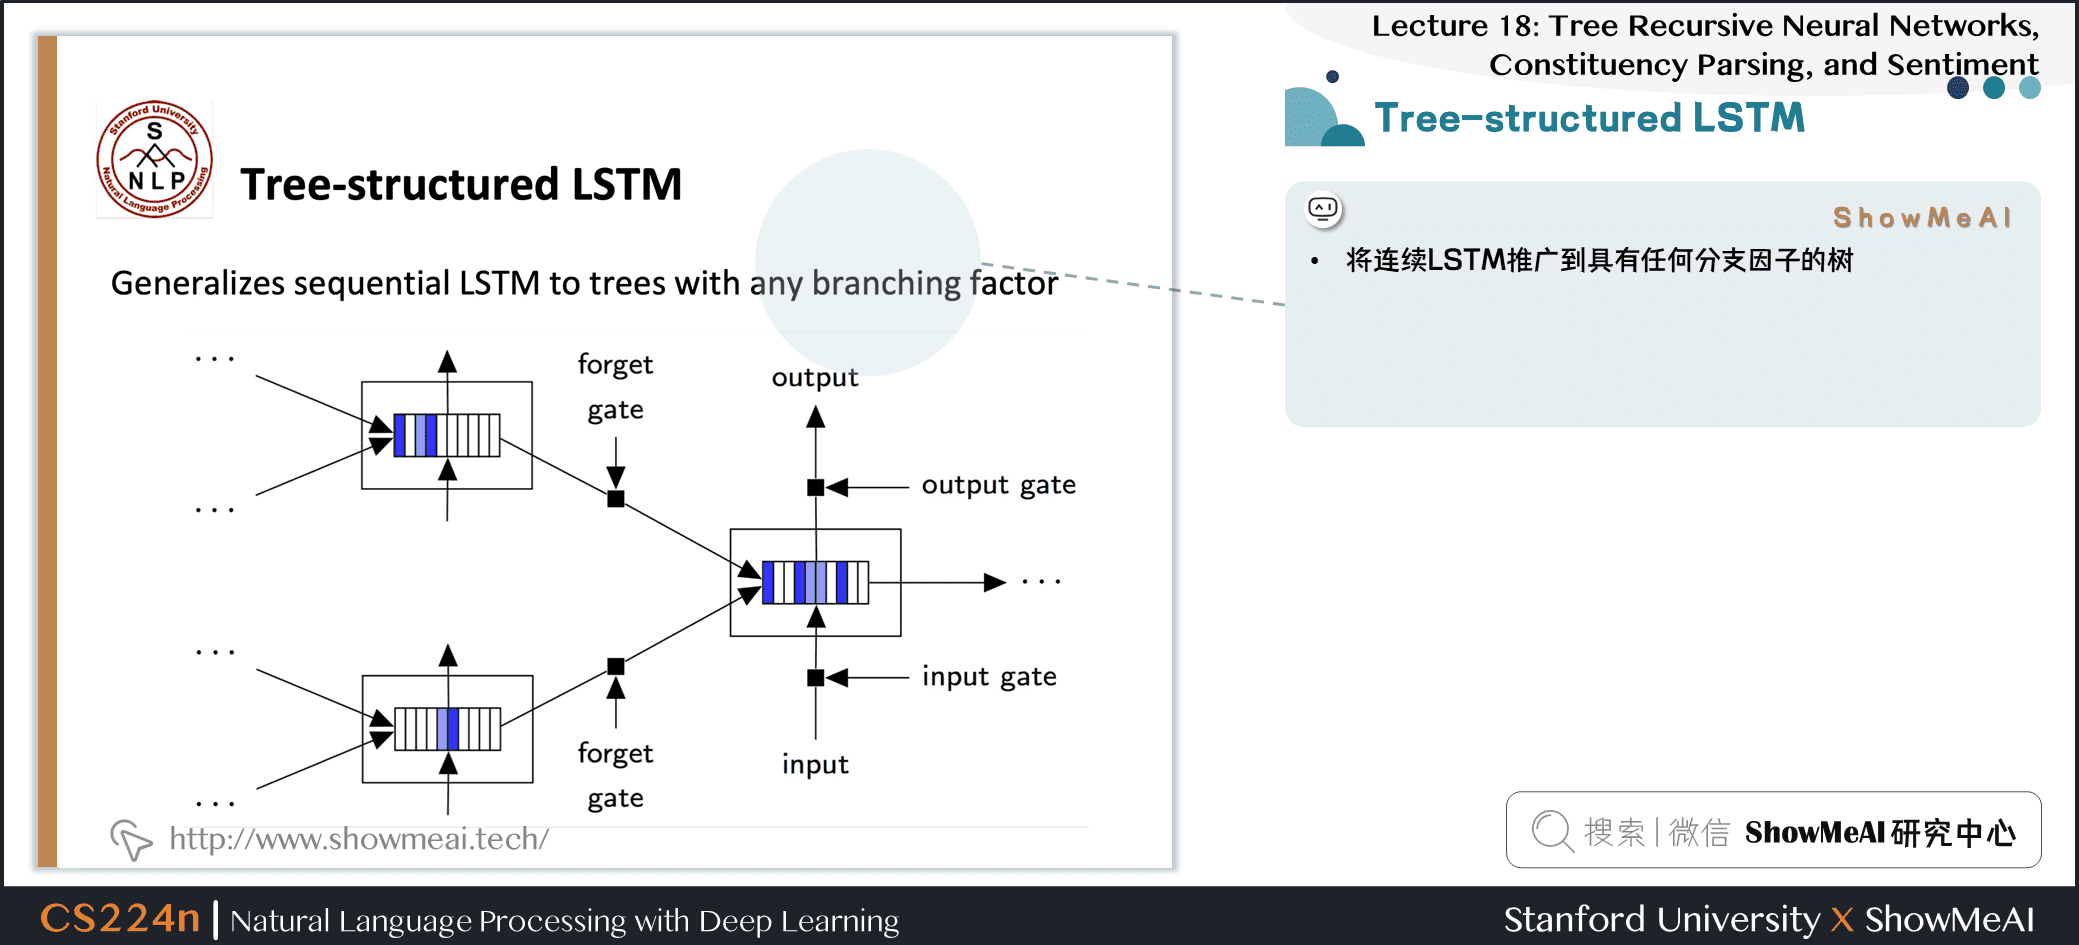 Tree-structured LSTM